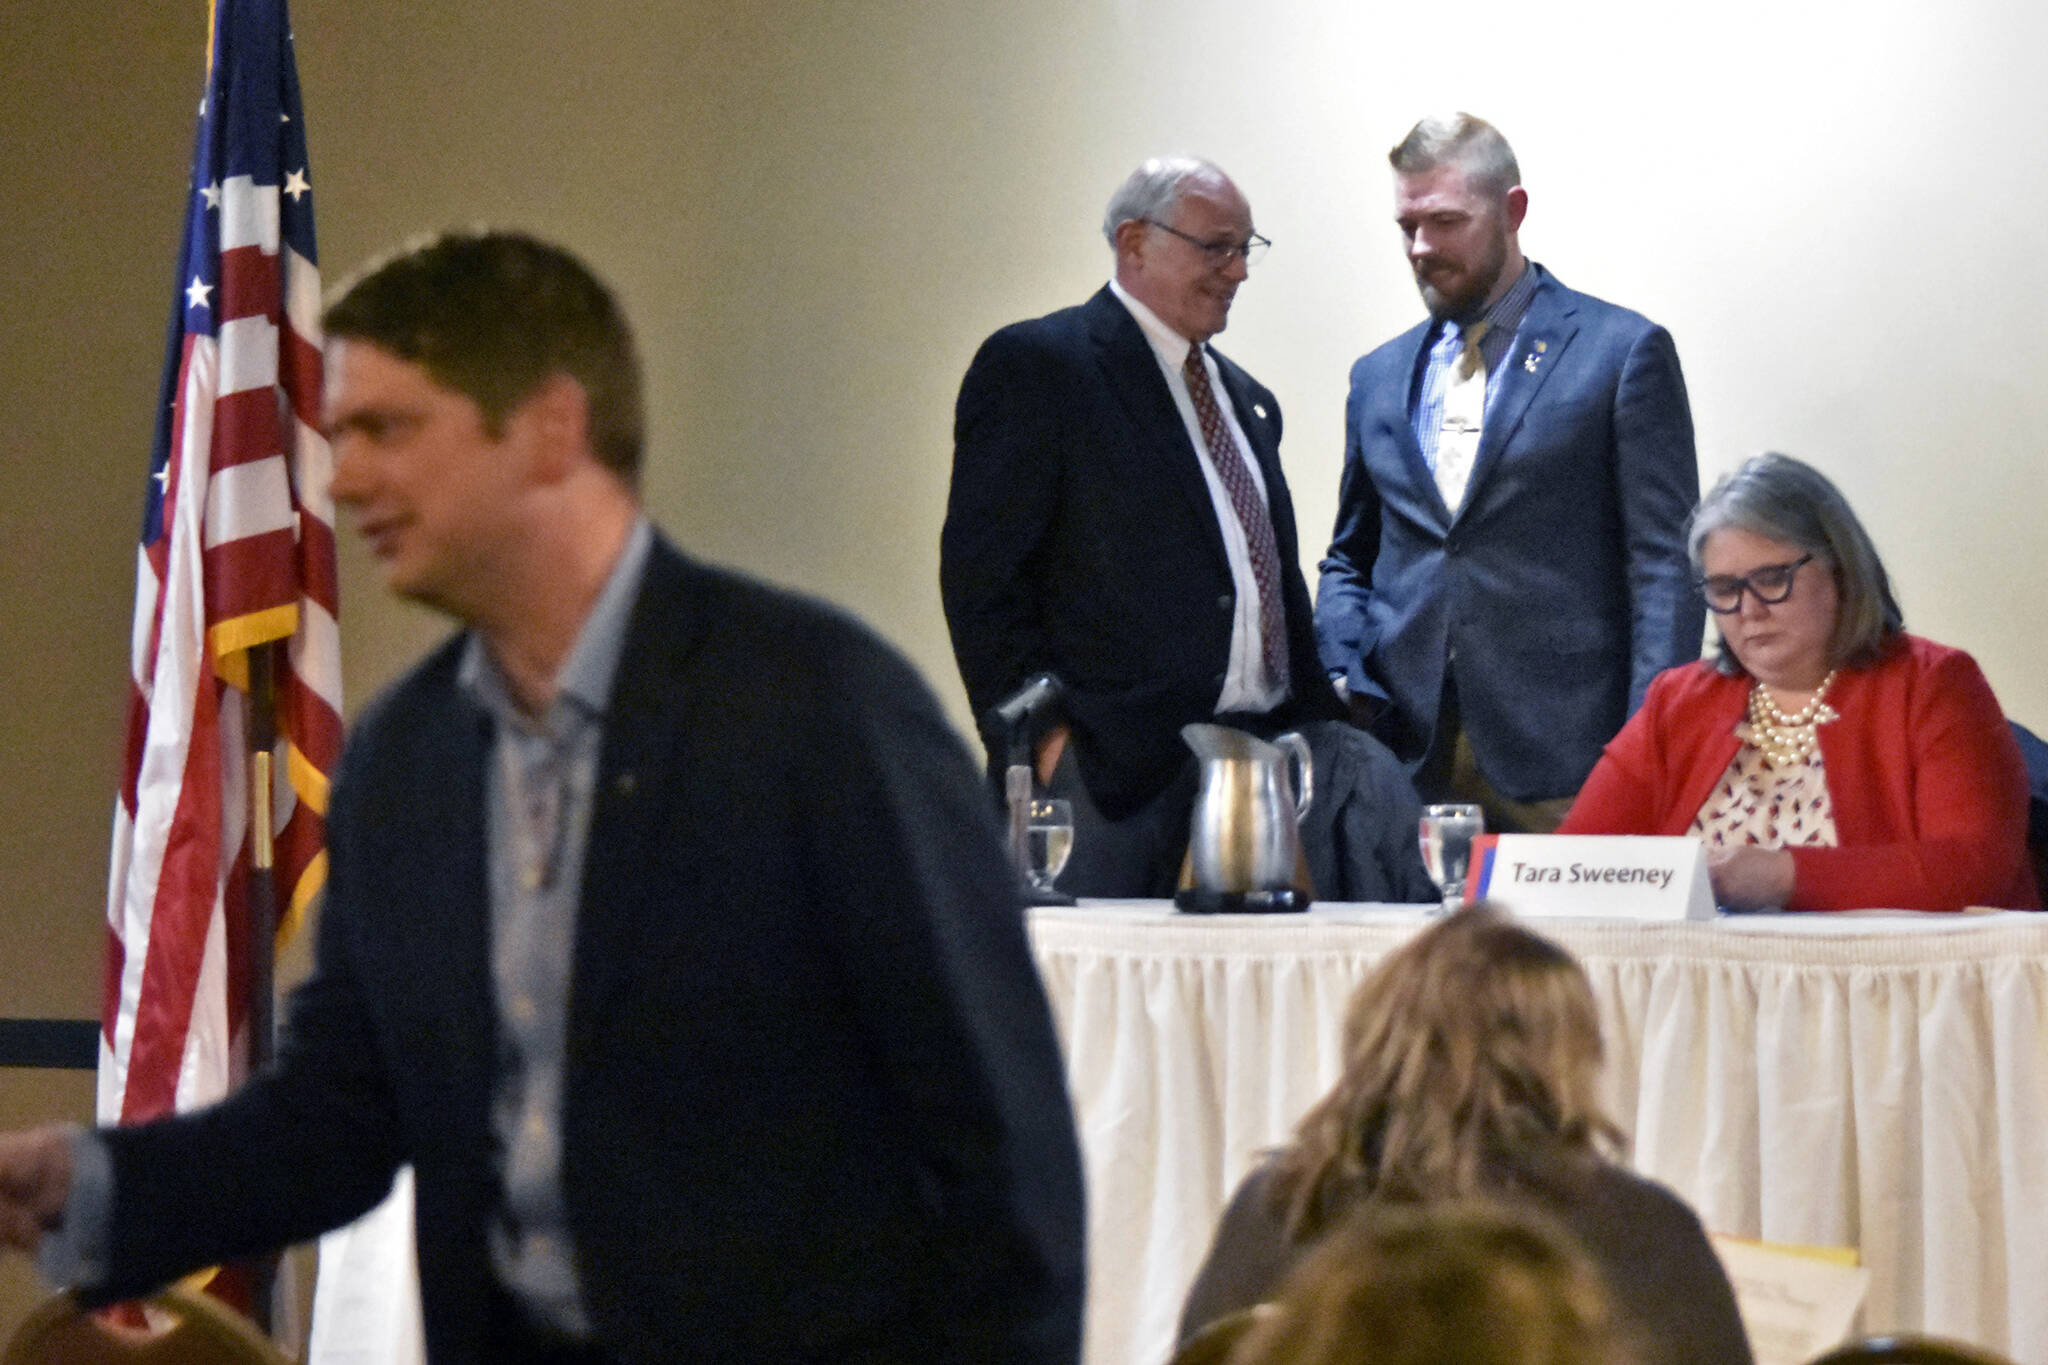 From left to right, Nick Begich III, foreground, and John Coghill, state Sen. Josh Revak, R-Anchorage, and Tara Sweeney, all Republican candidates for Alaska's seat in the U.S. House of Representatives, were at Juneau's Baranoff Hotel on Tuesday, May 16, 2022, for a debate hosted by local Republicans. (Peter Segall / Juneau Empire)